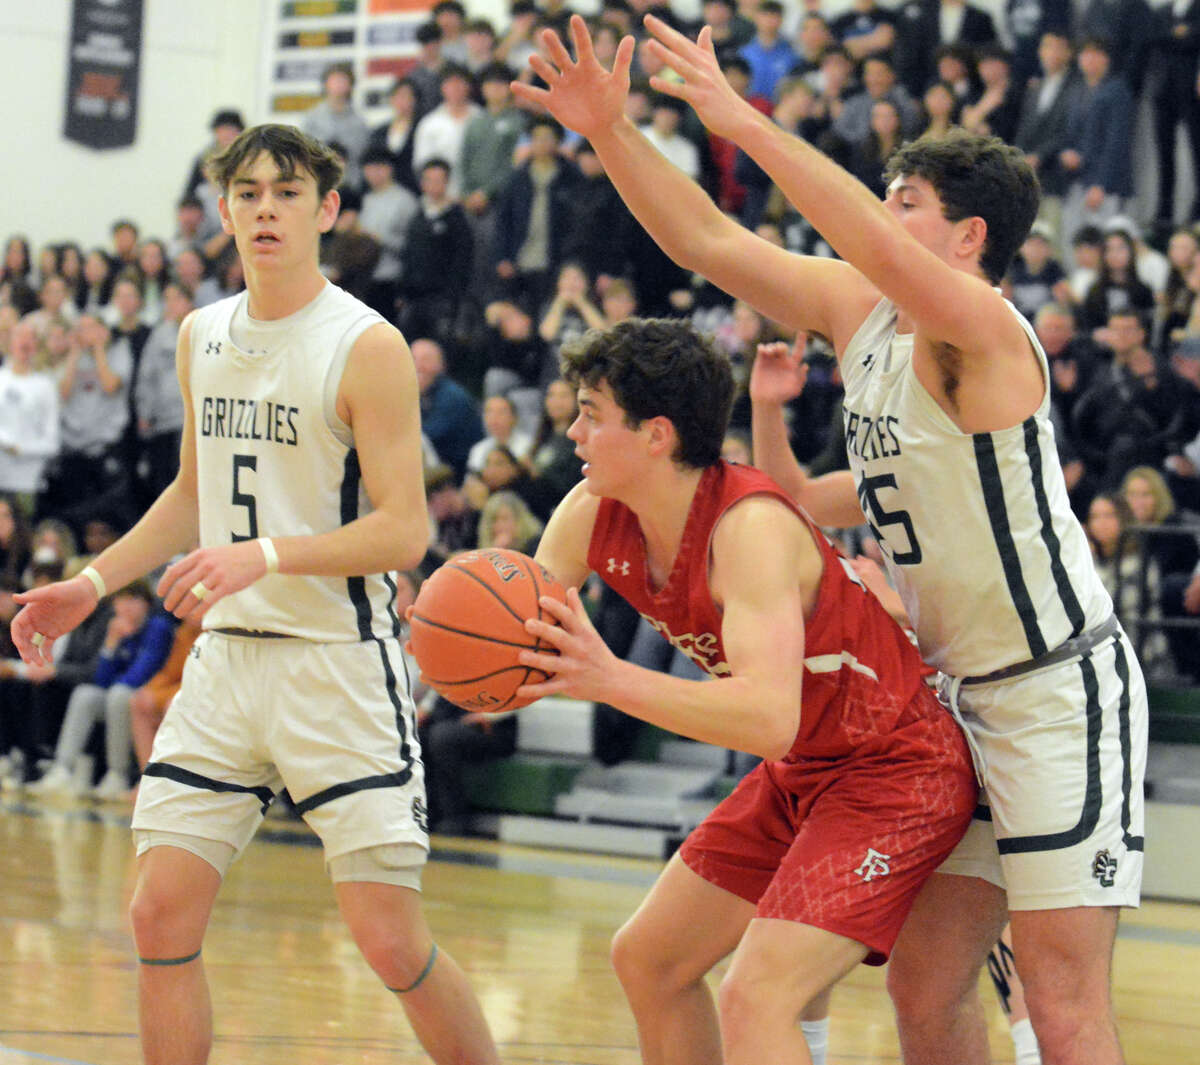 Tommy Scholl of Fairfield Prep looks for a teammate while being guarded by Kevin Goldberg of Guilford. Justin hess (5) of Guilford looks on.